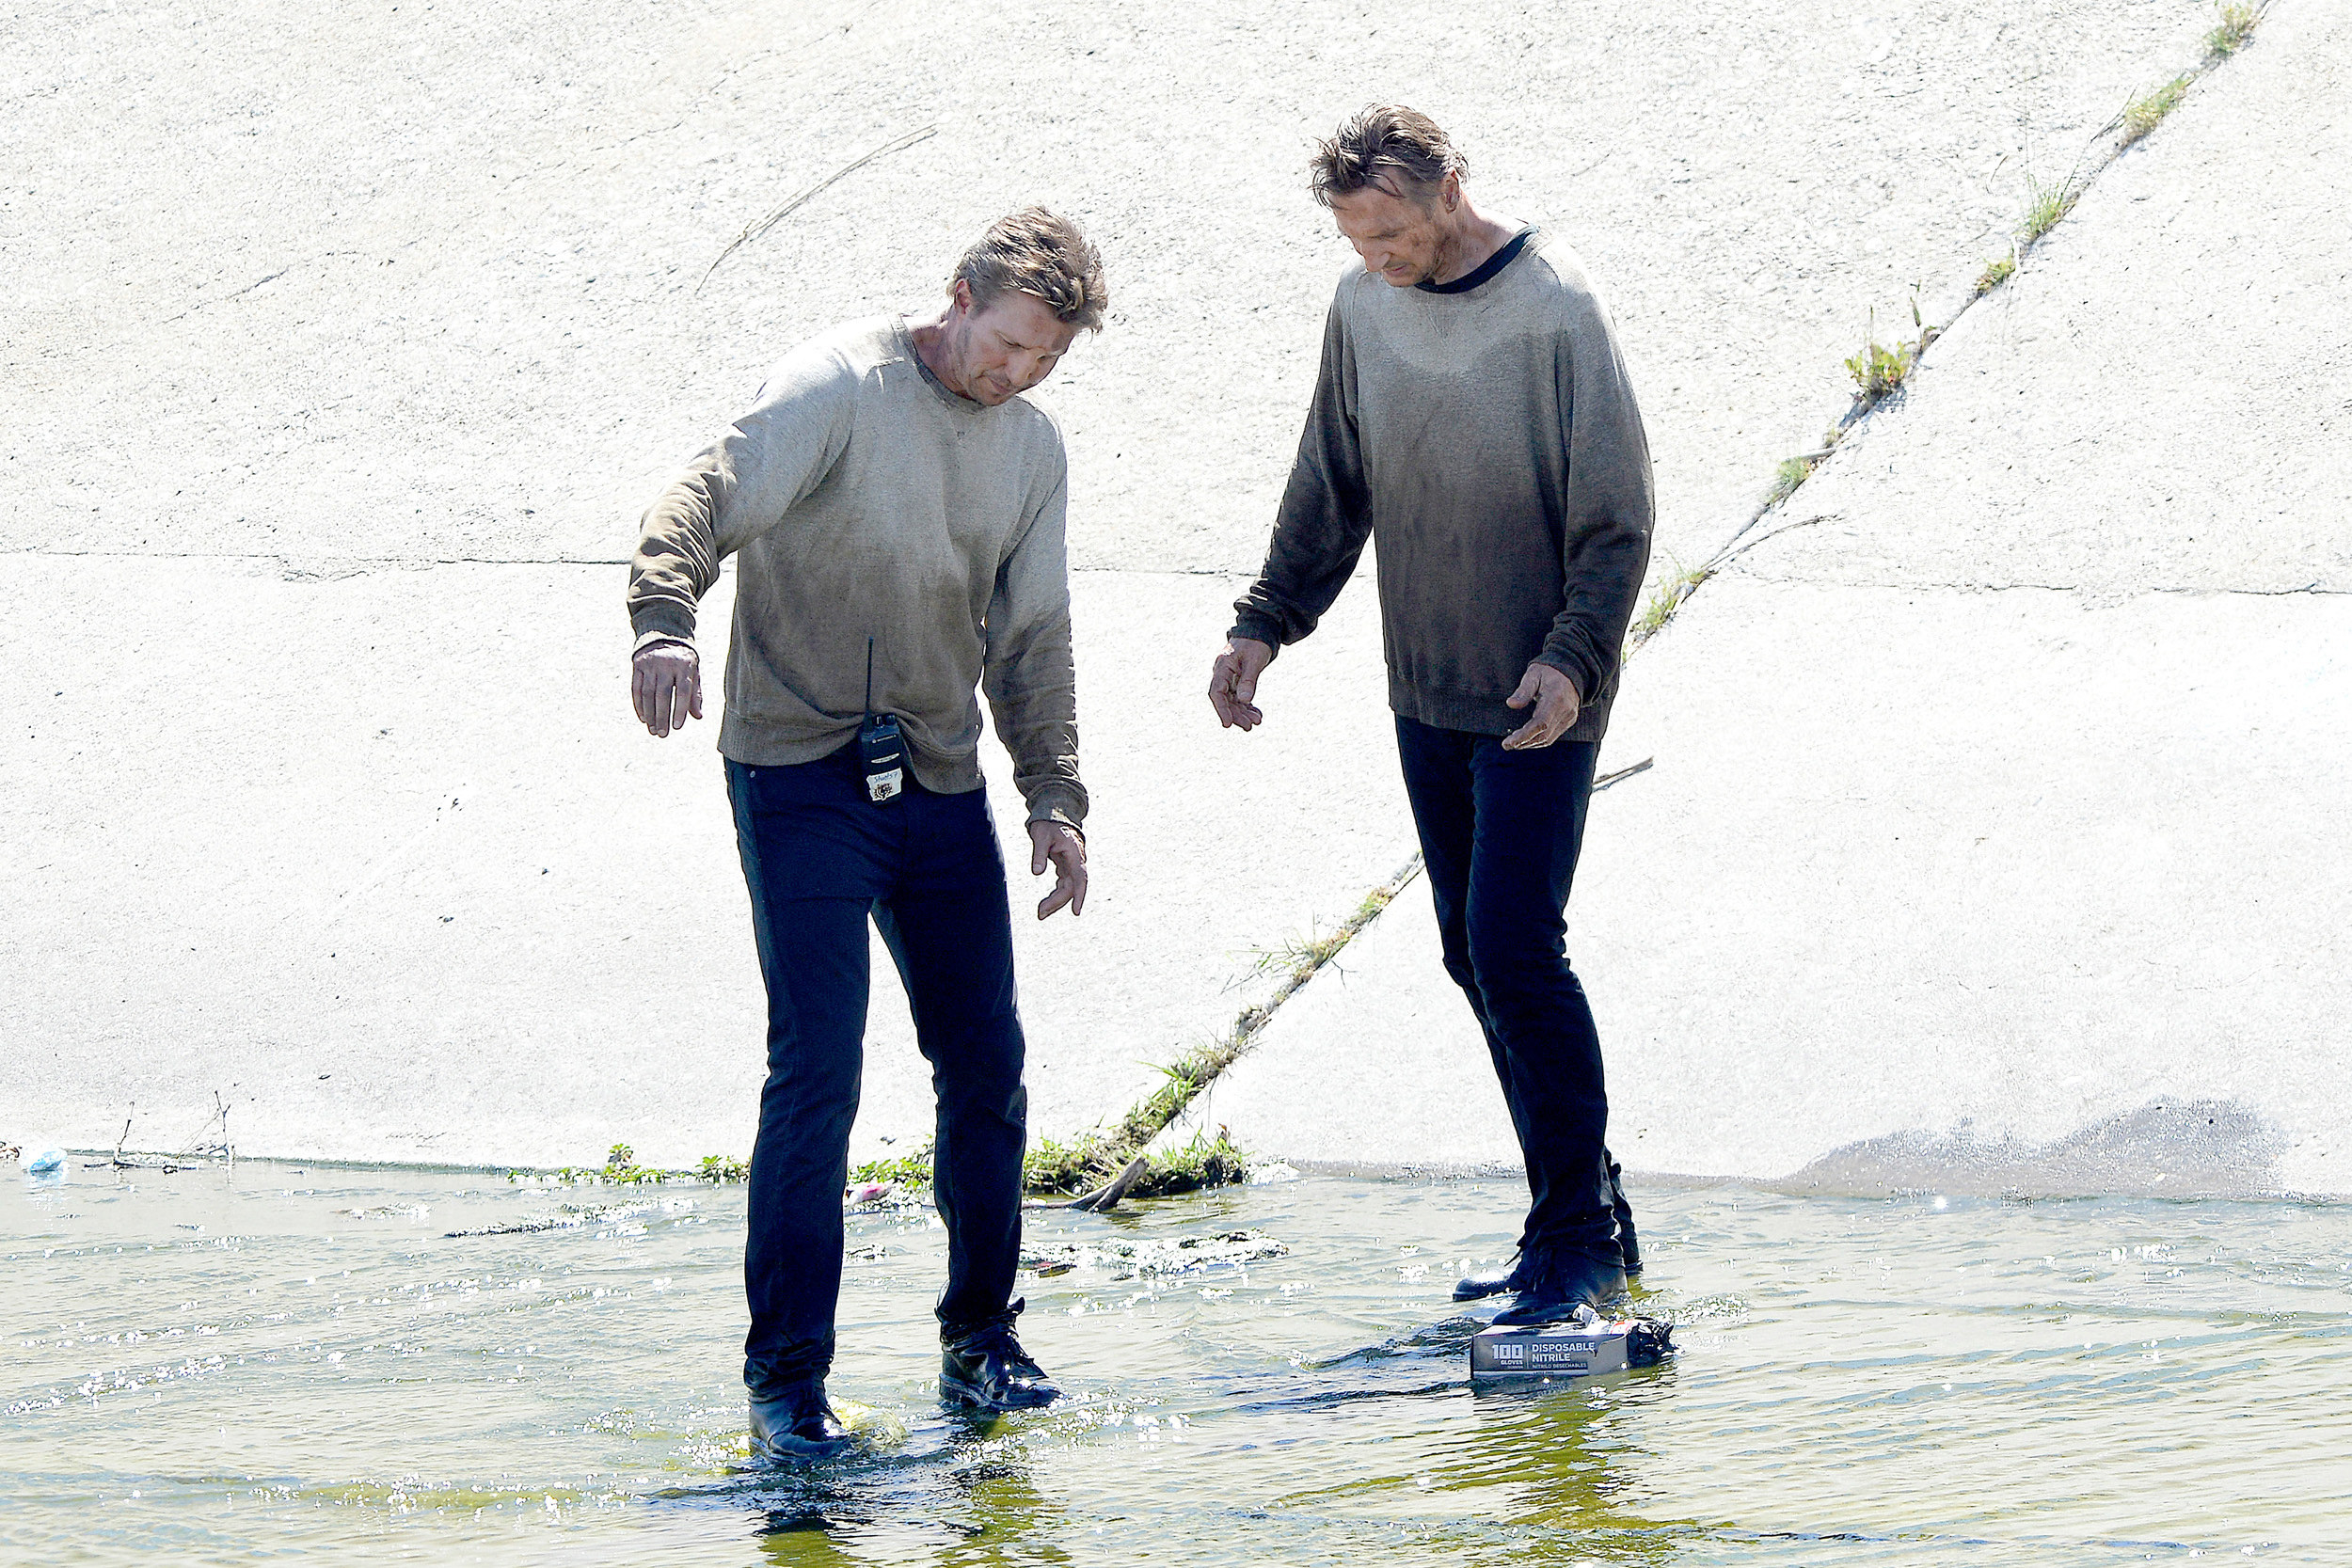 Liam Neeson and his stunt double stepping in water while filming